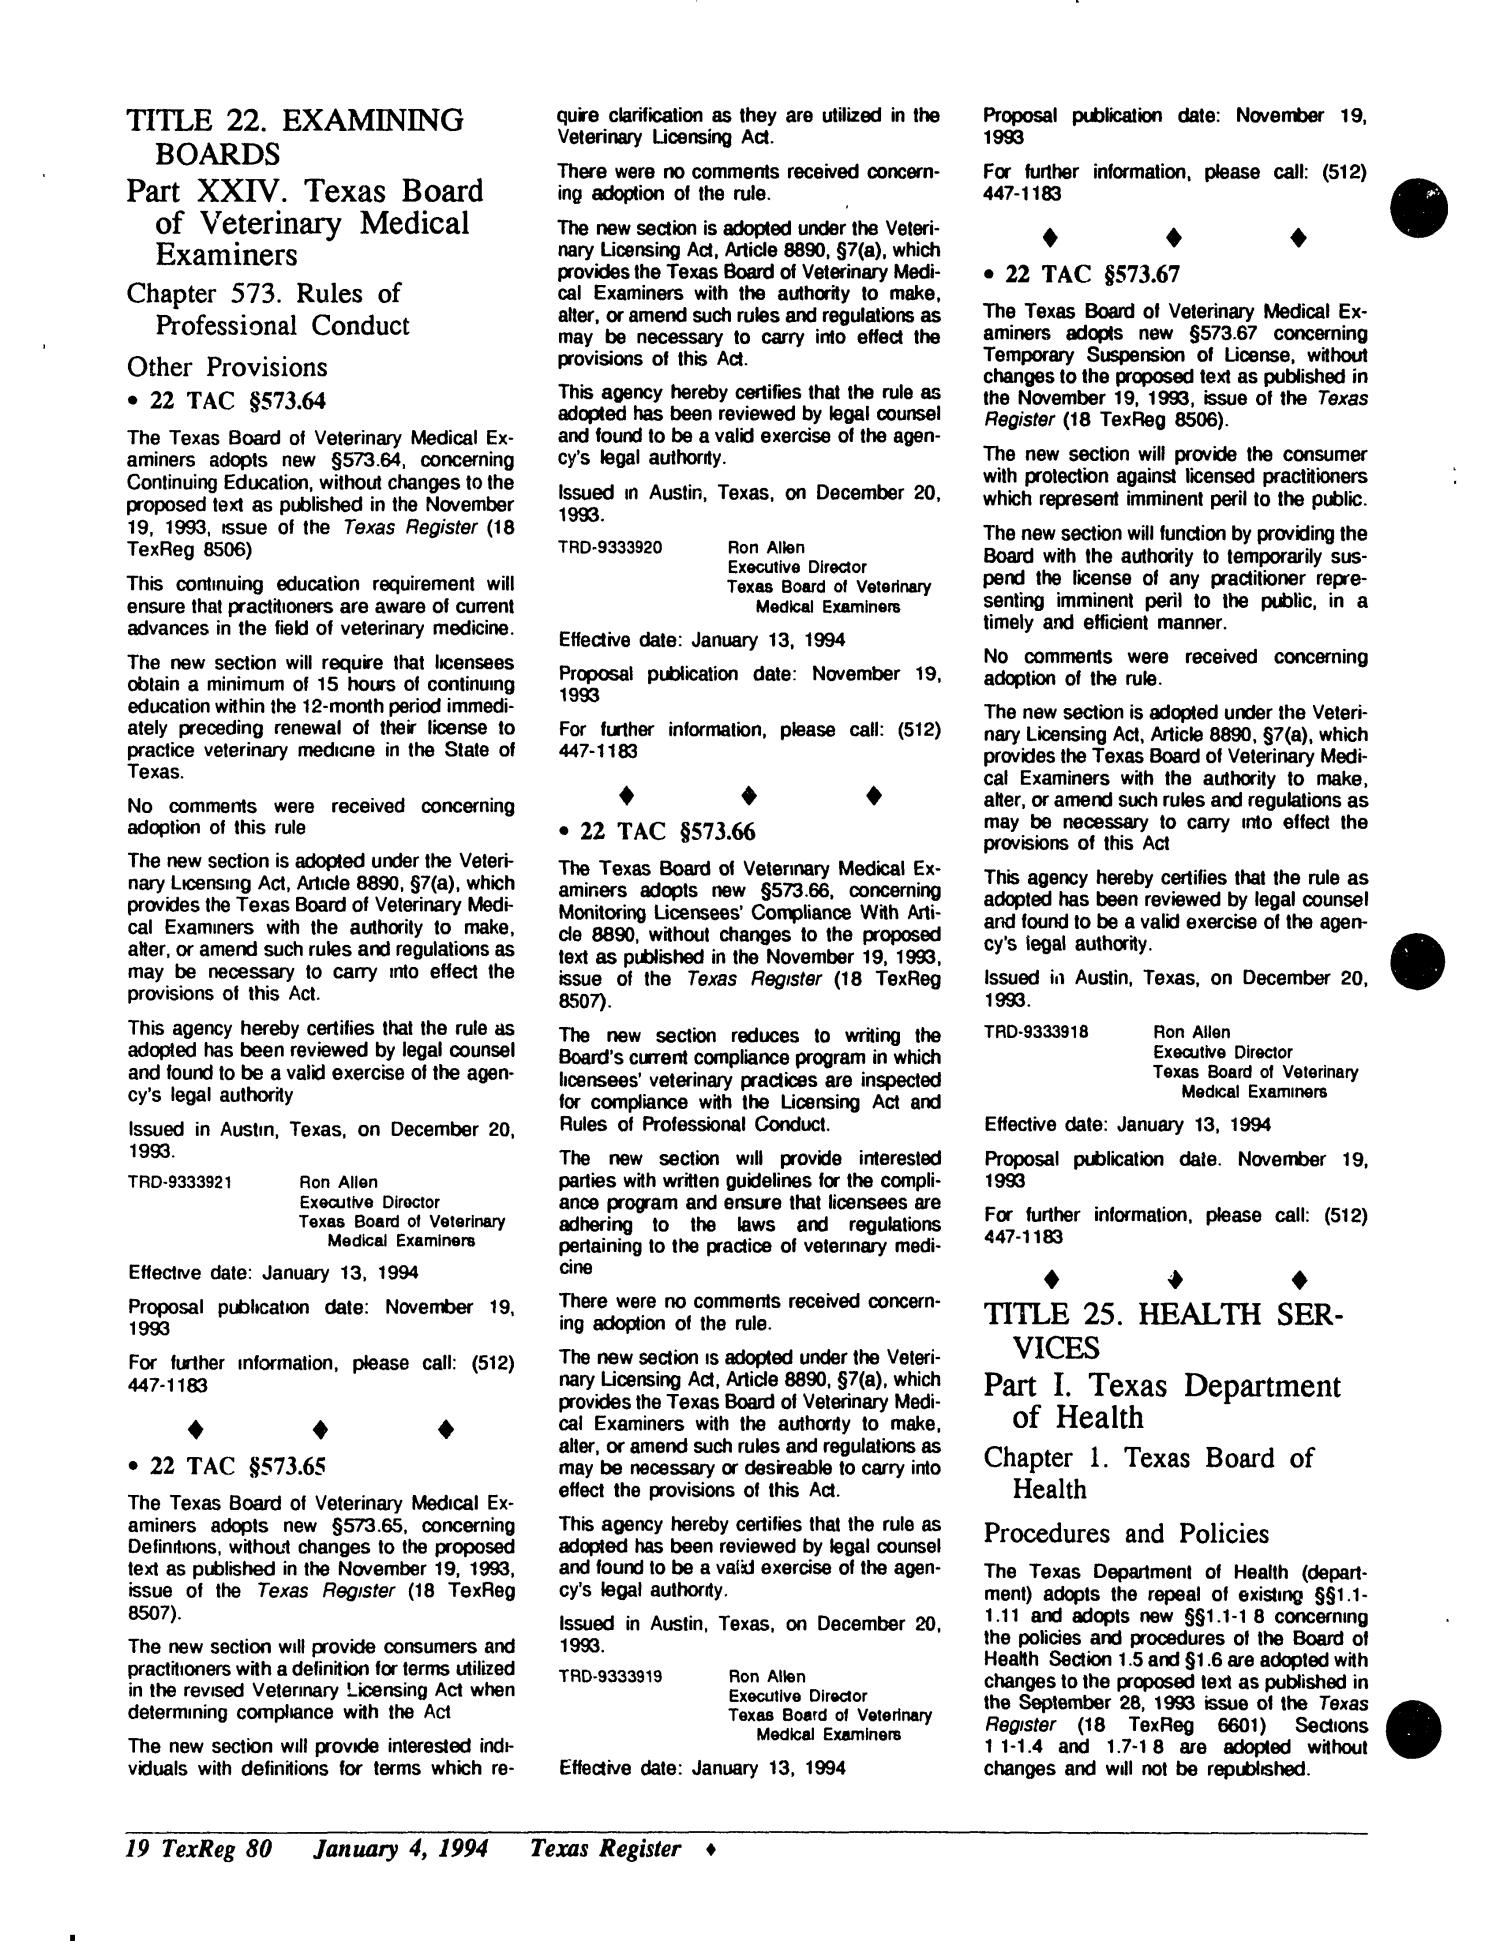 Texas Register, Volume 19, Number 1, Pages 1-129, January 4, 1994
                                                
                                                    80
                                                